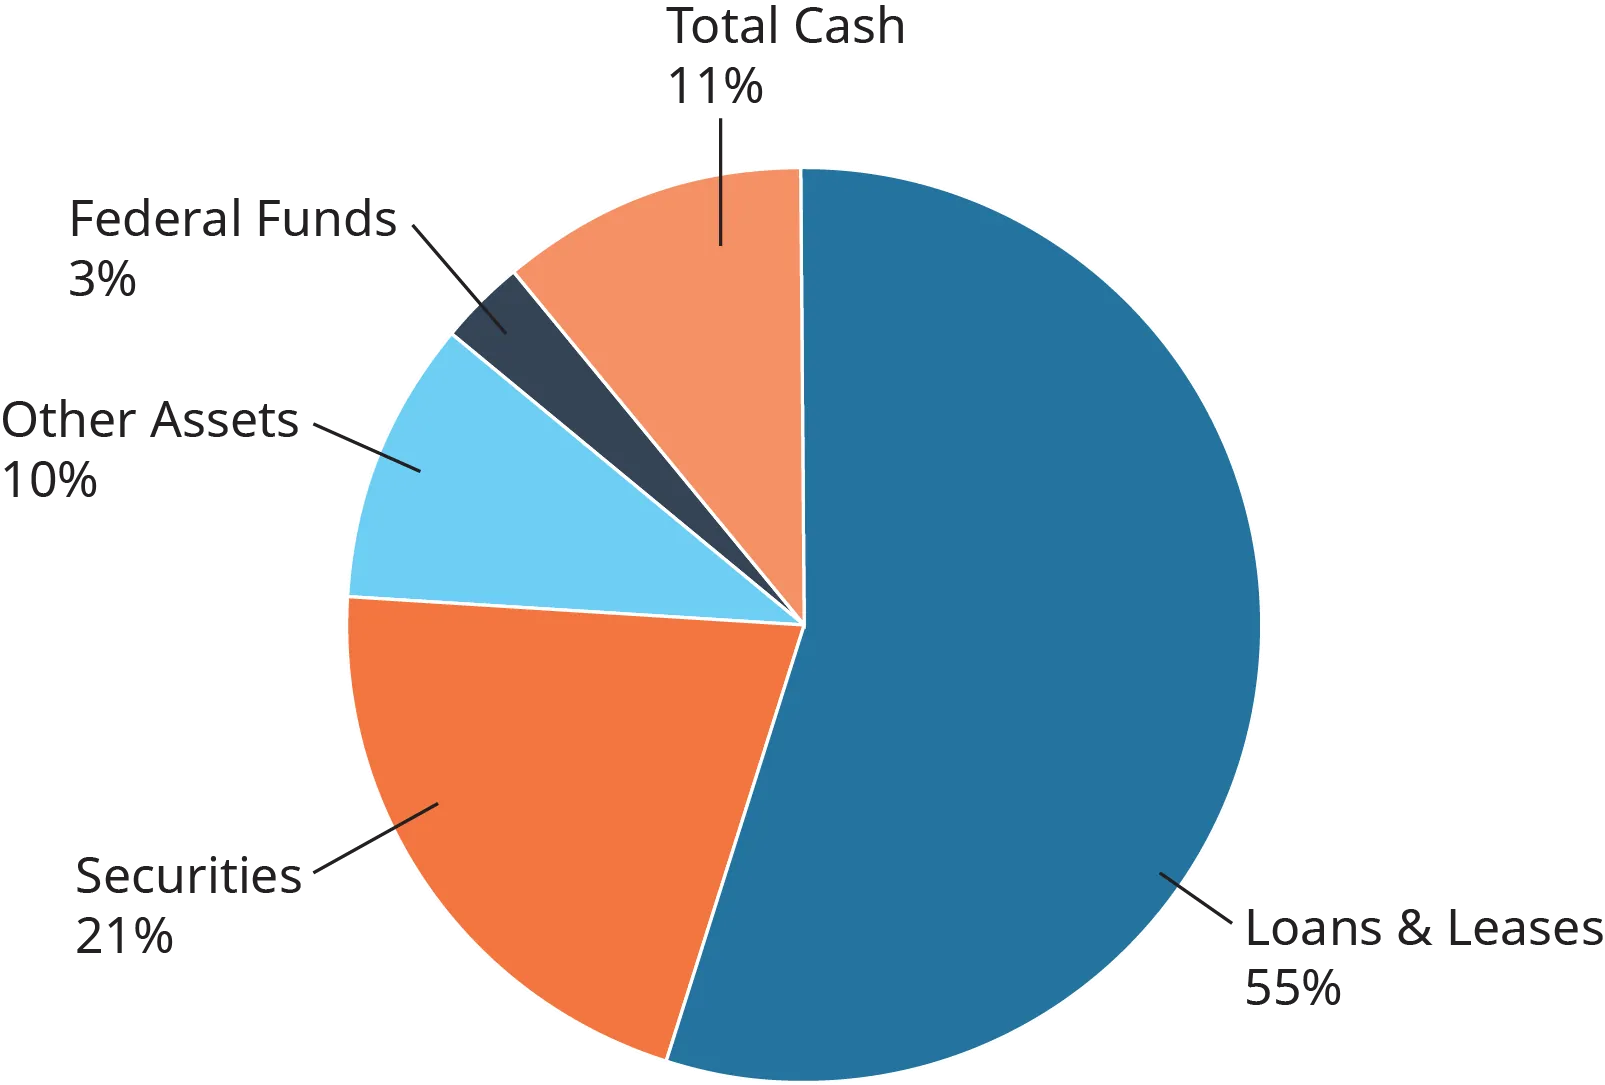 A pie chart is shown. The sections and percentages are as follows. Total cash, 11 percent. Federal funds, 3 percent. Other assets, 10 percent. Securities, 21 percent. Loans and leases, 55 percent.